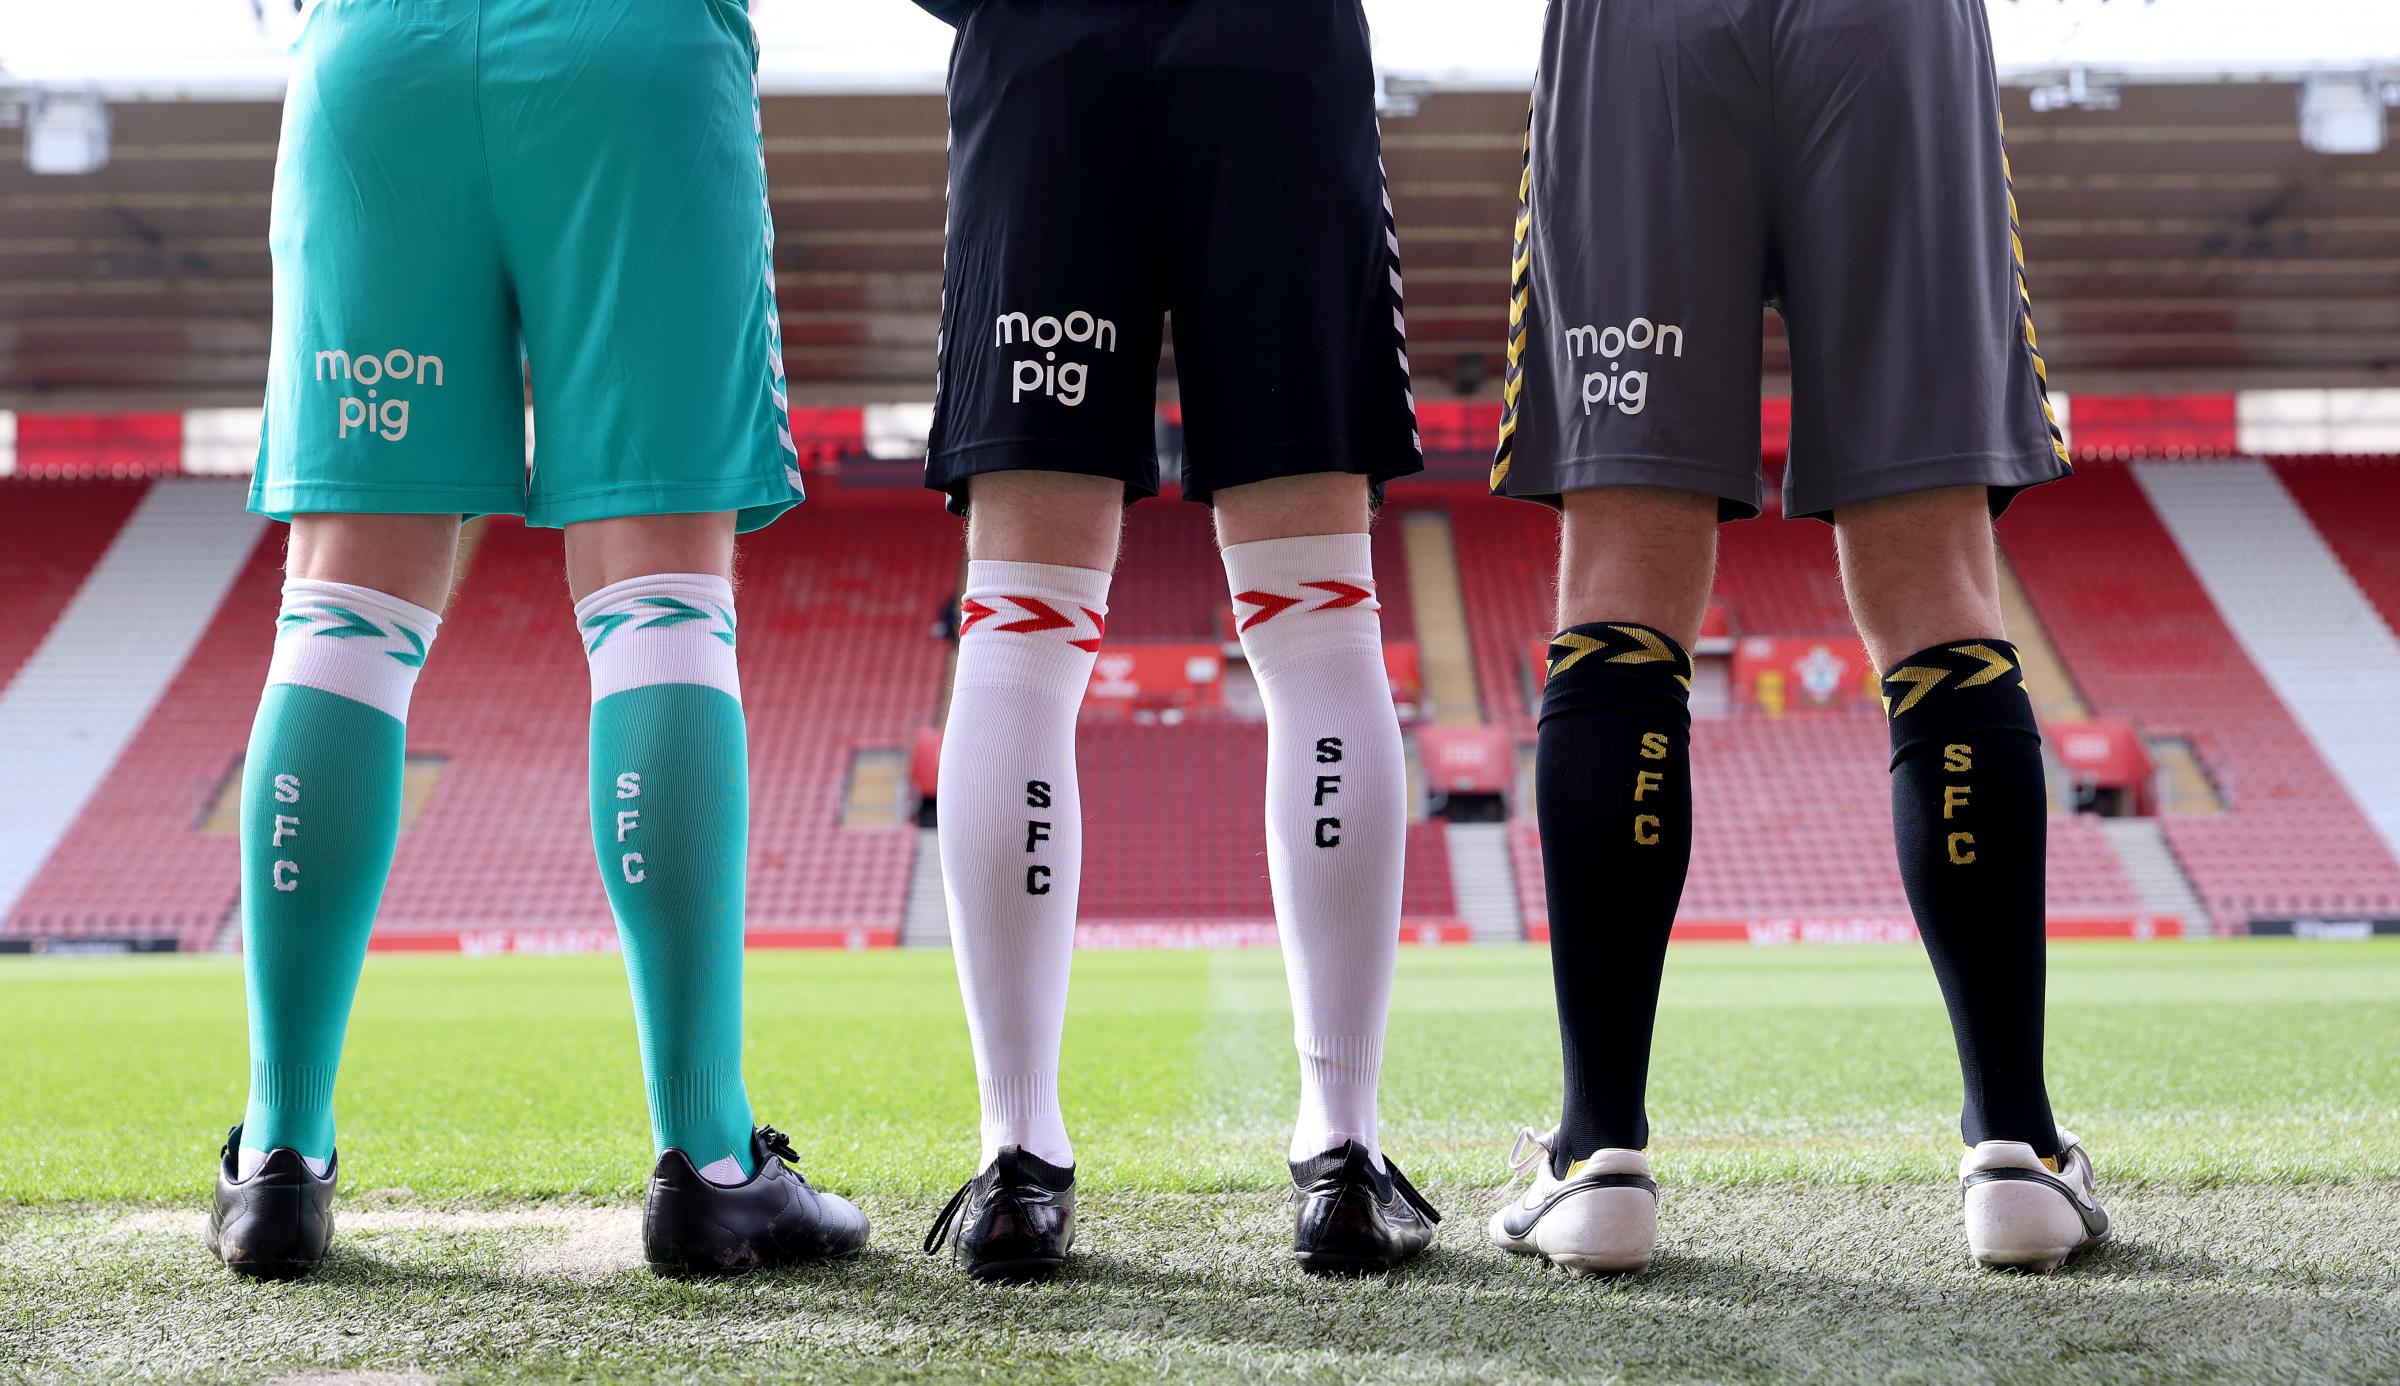 Southampton FC announce new partnership with Moonpig